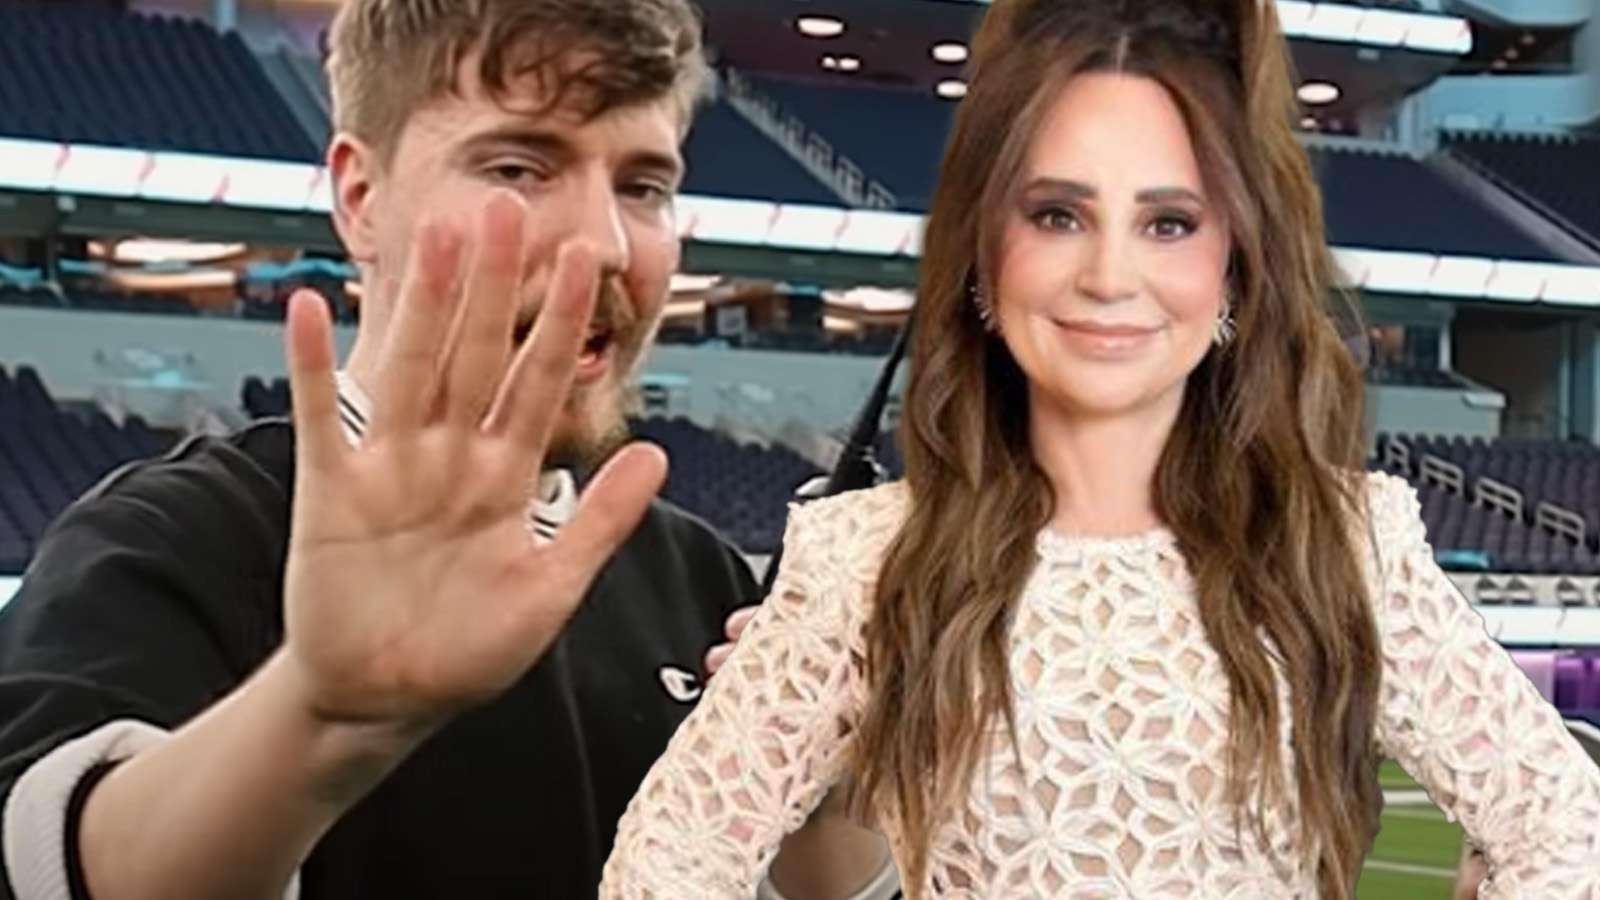 MrBeast accused of editing out Rosanna Pansino after placing in Creator Games 3